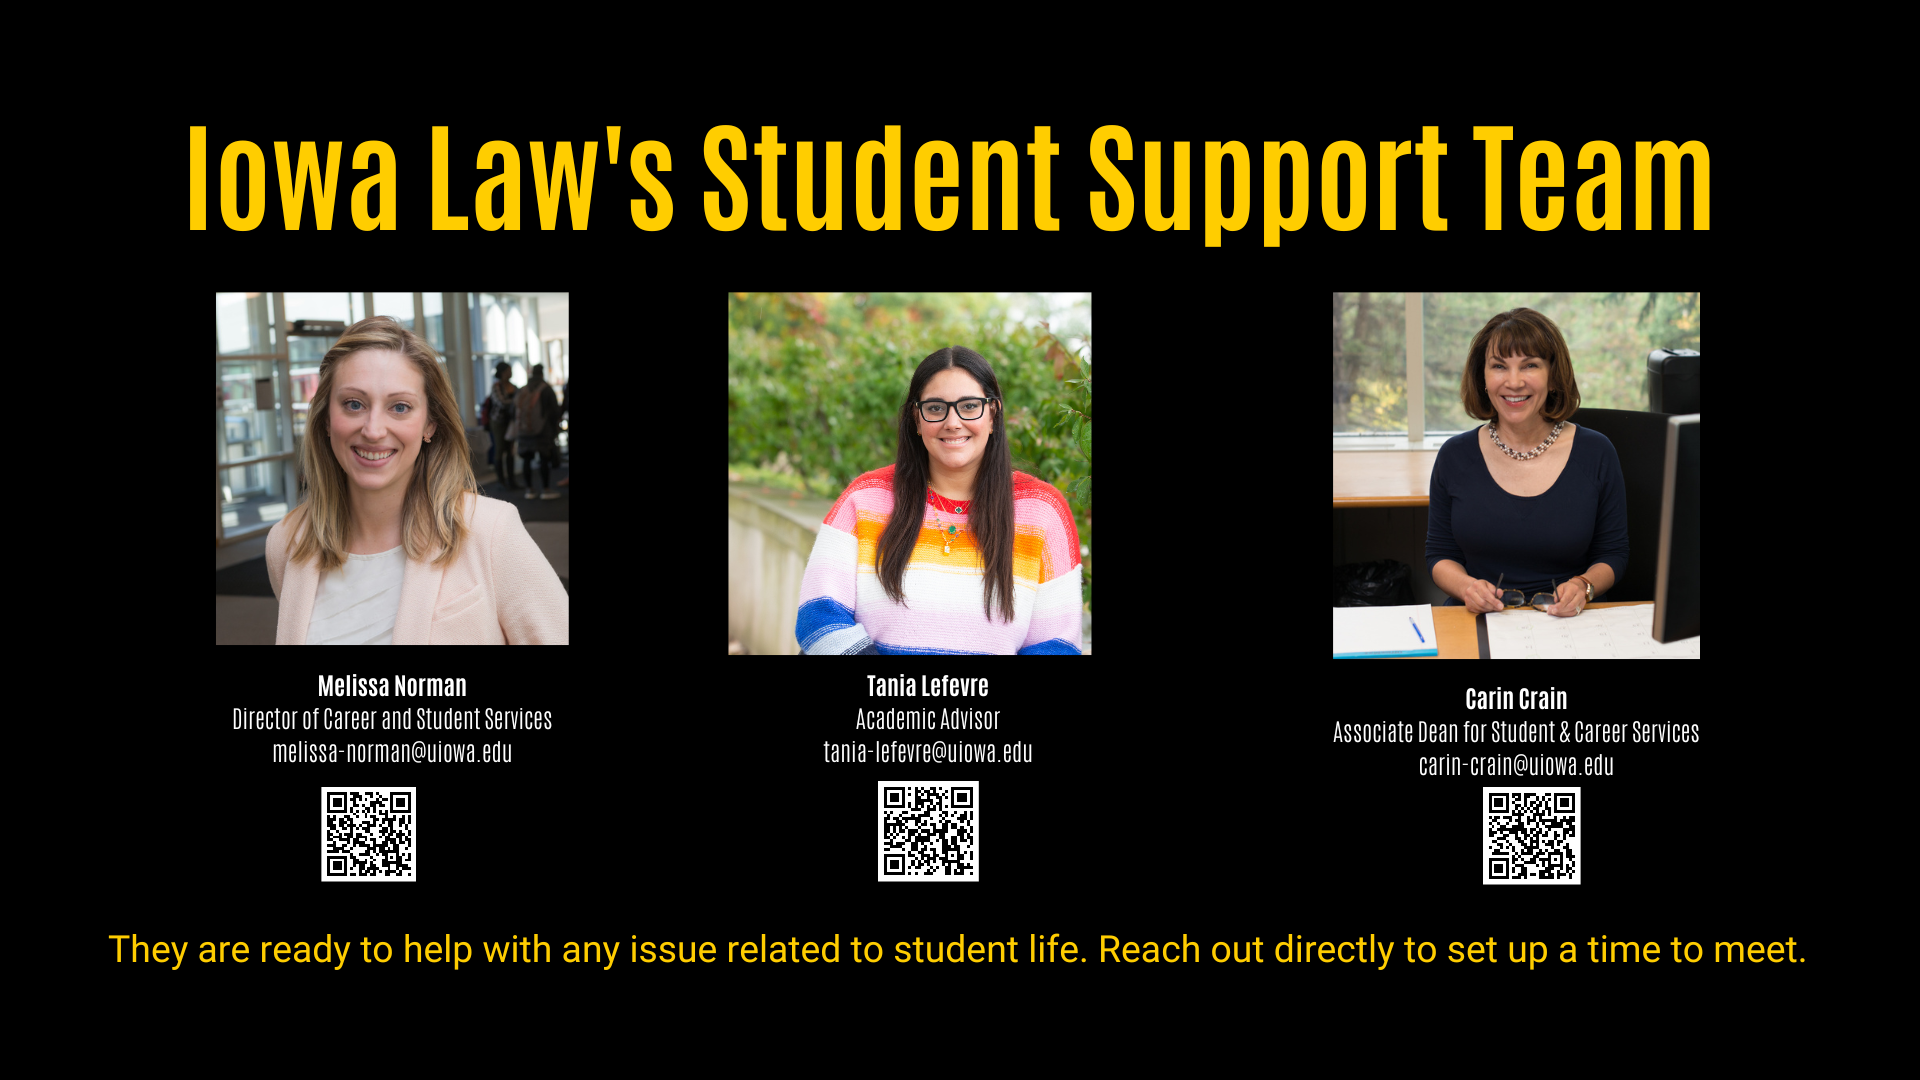 Iowa Law's Student Support Team